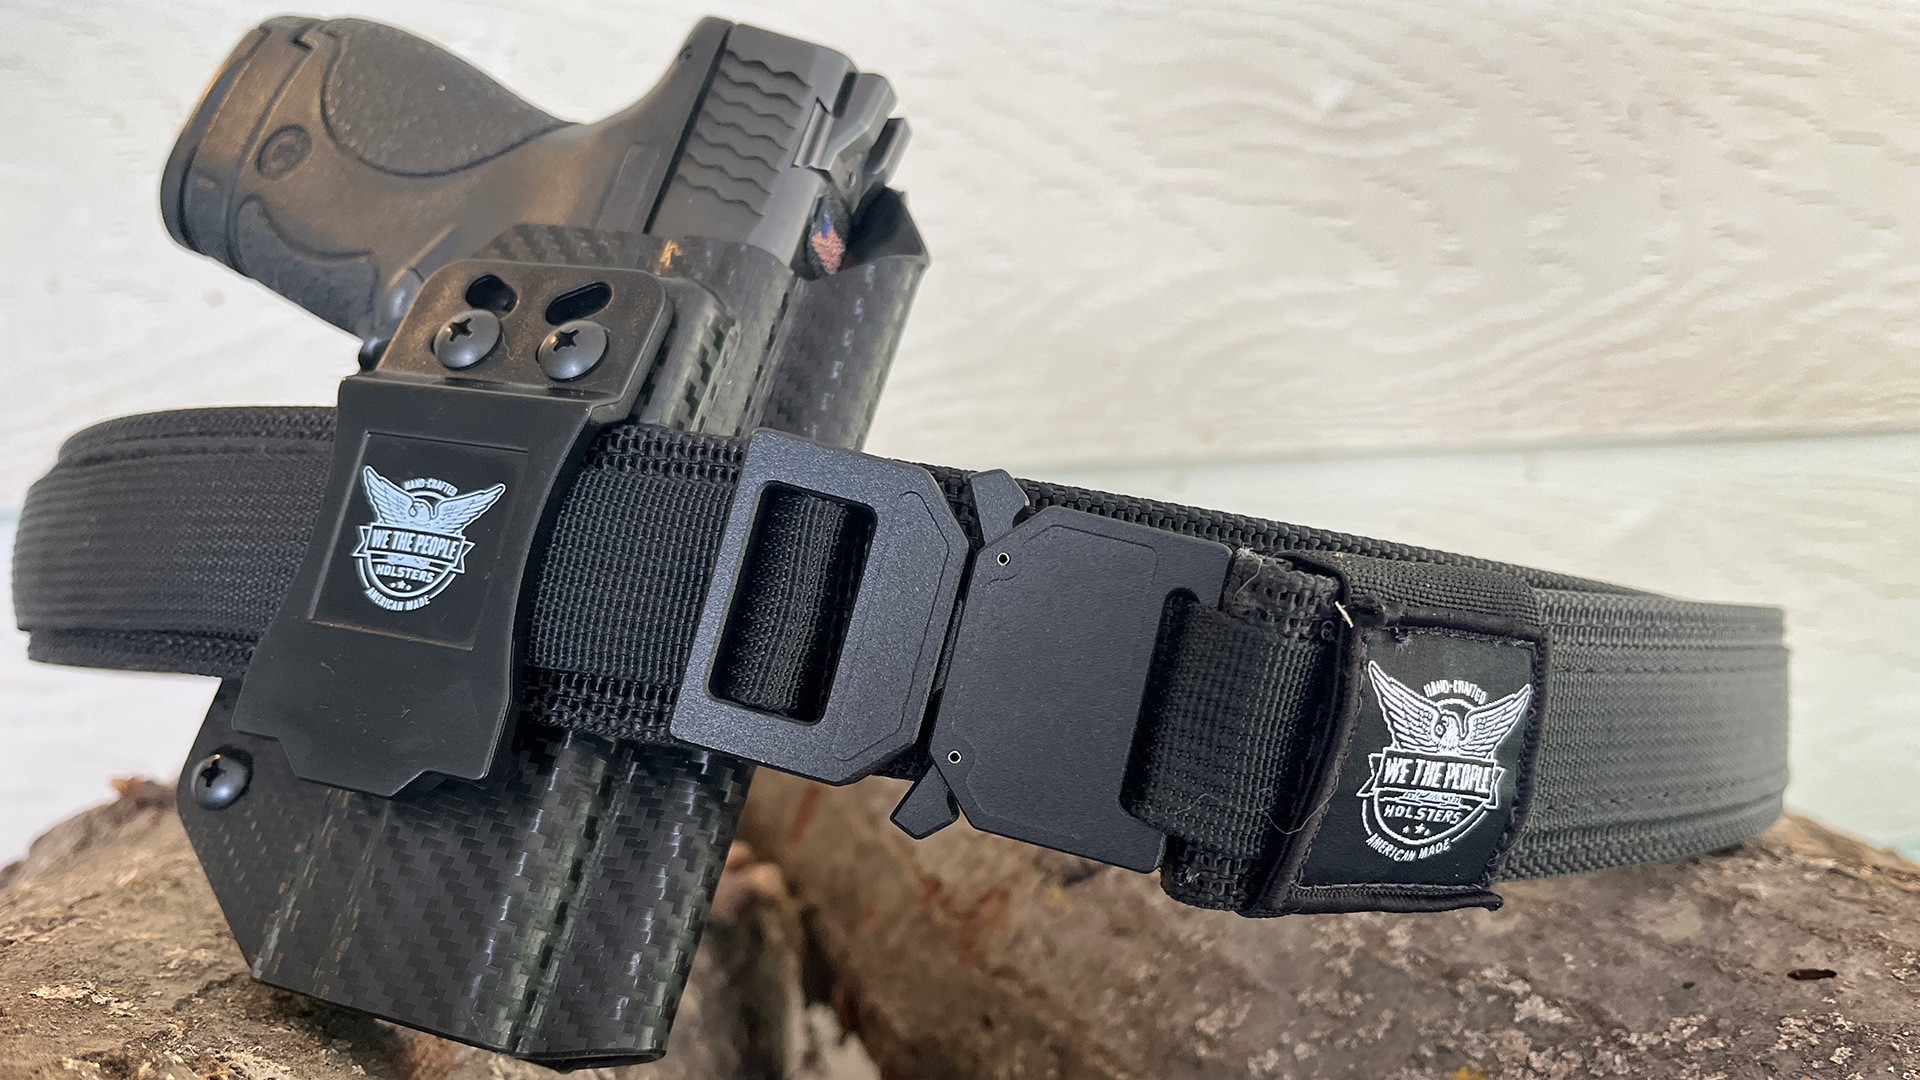 We The People Holsters - Check out our all-new 𝗙𝗮𝗹𝗰𝗼𝗻